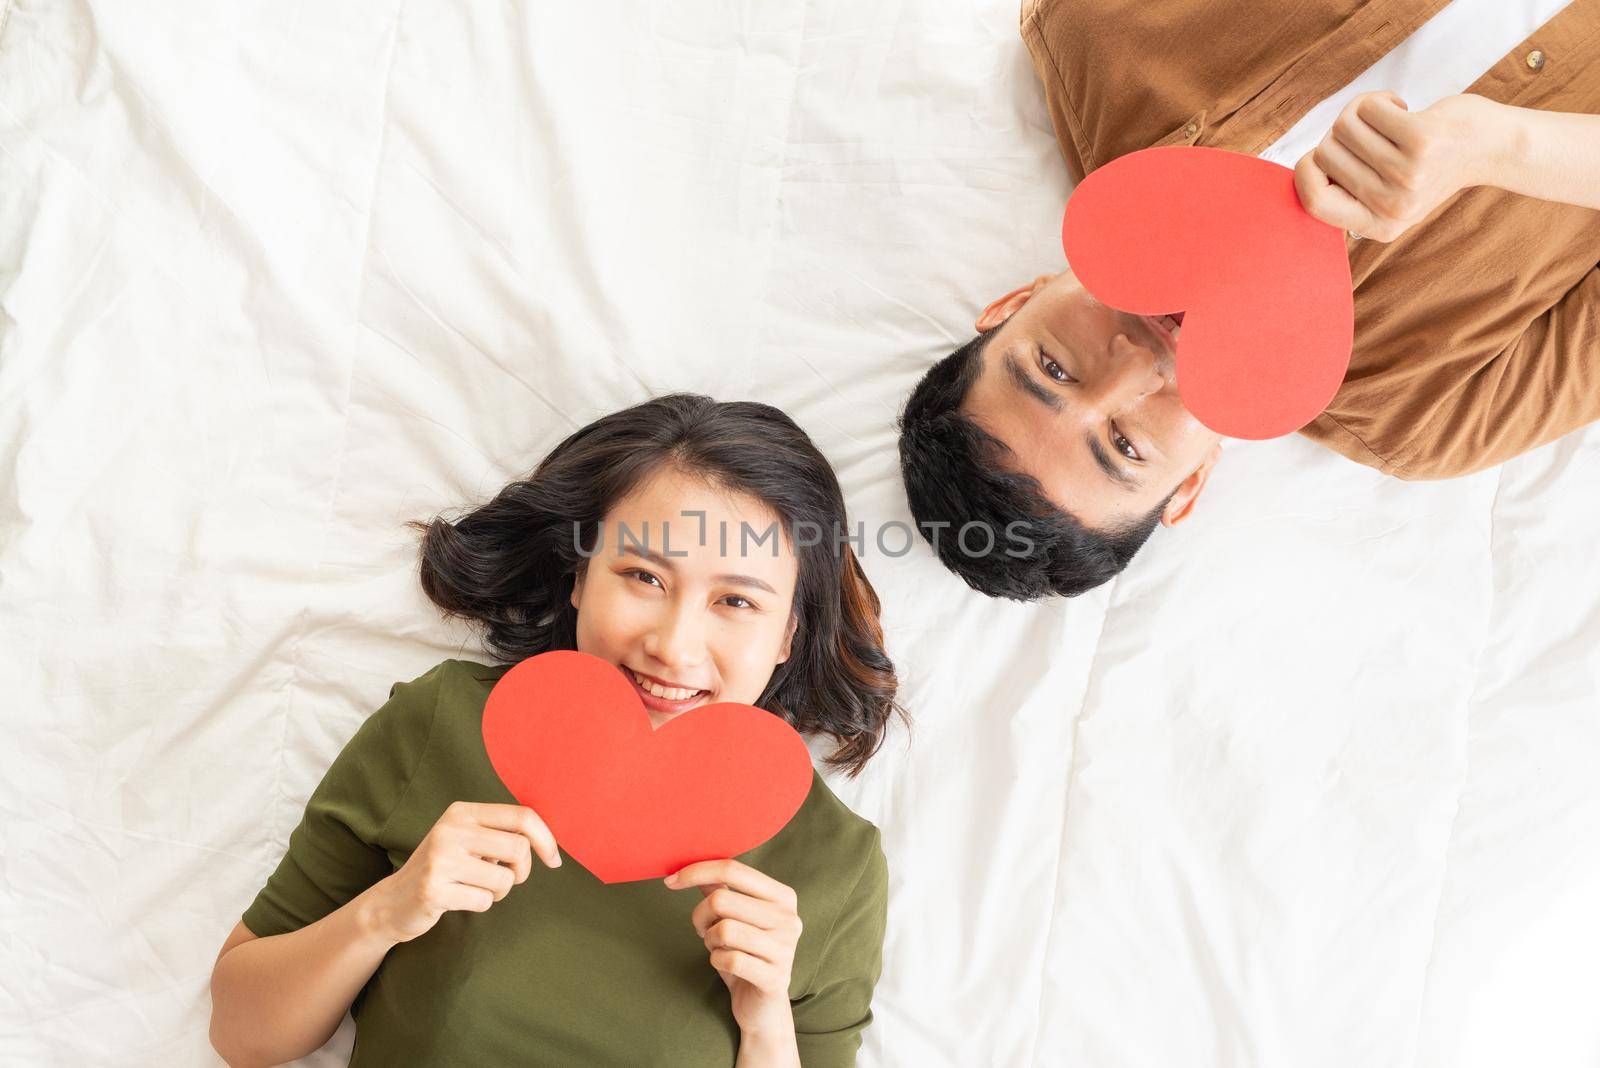 Smiling young couple lying on bed with many heart shapes.